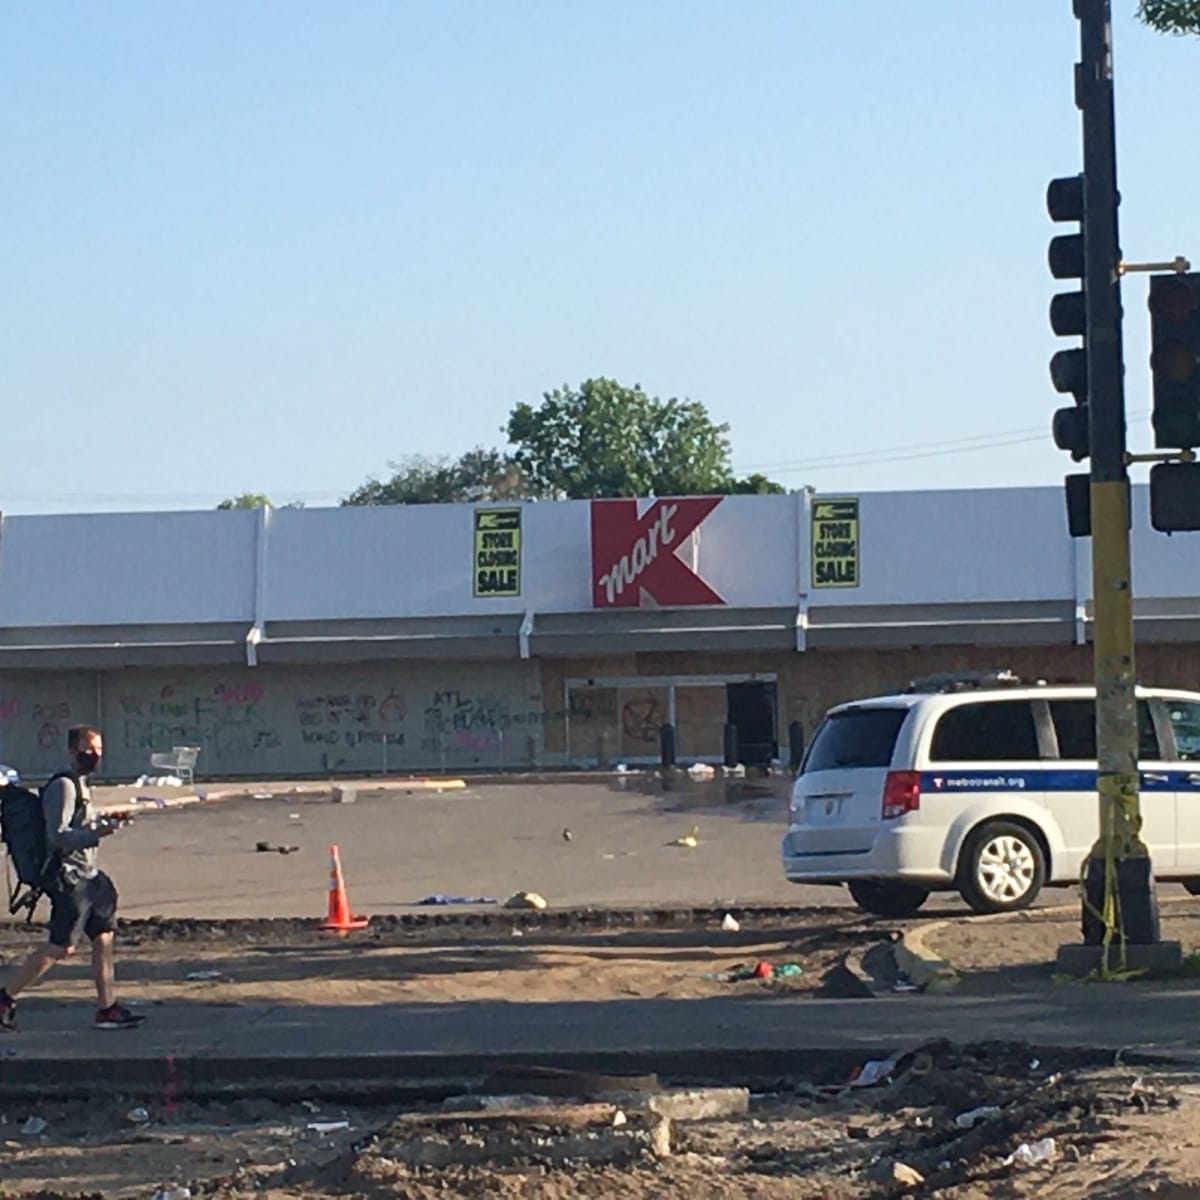 Post Office Opens At Former Kmart In Minneapolis Replacing 2 Destroyed In Riots - Bring Me The News